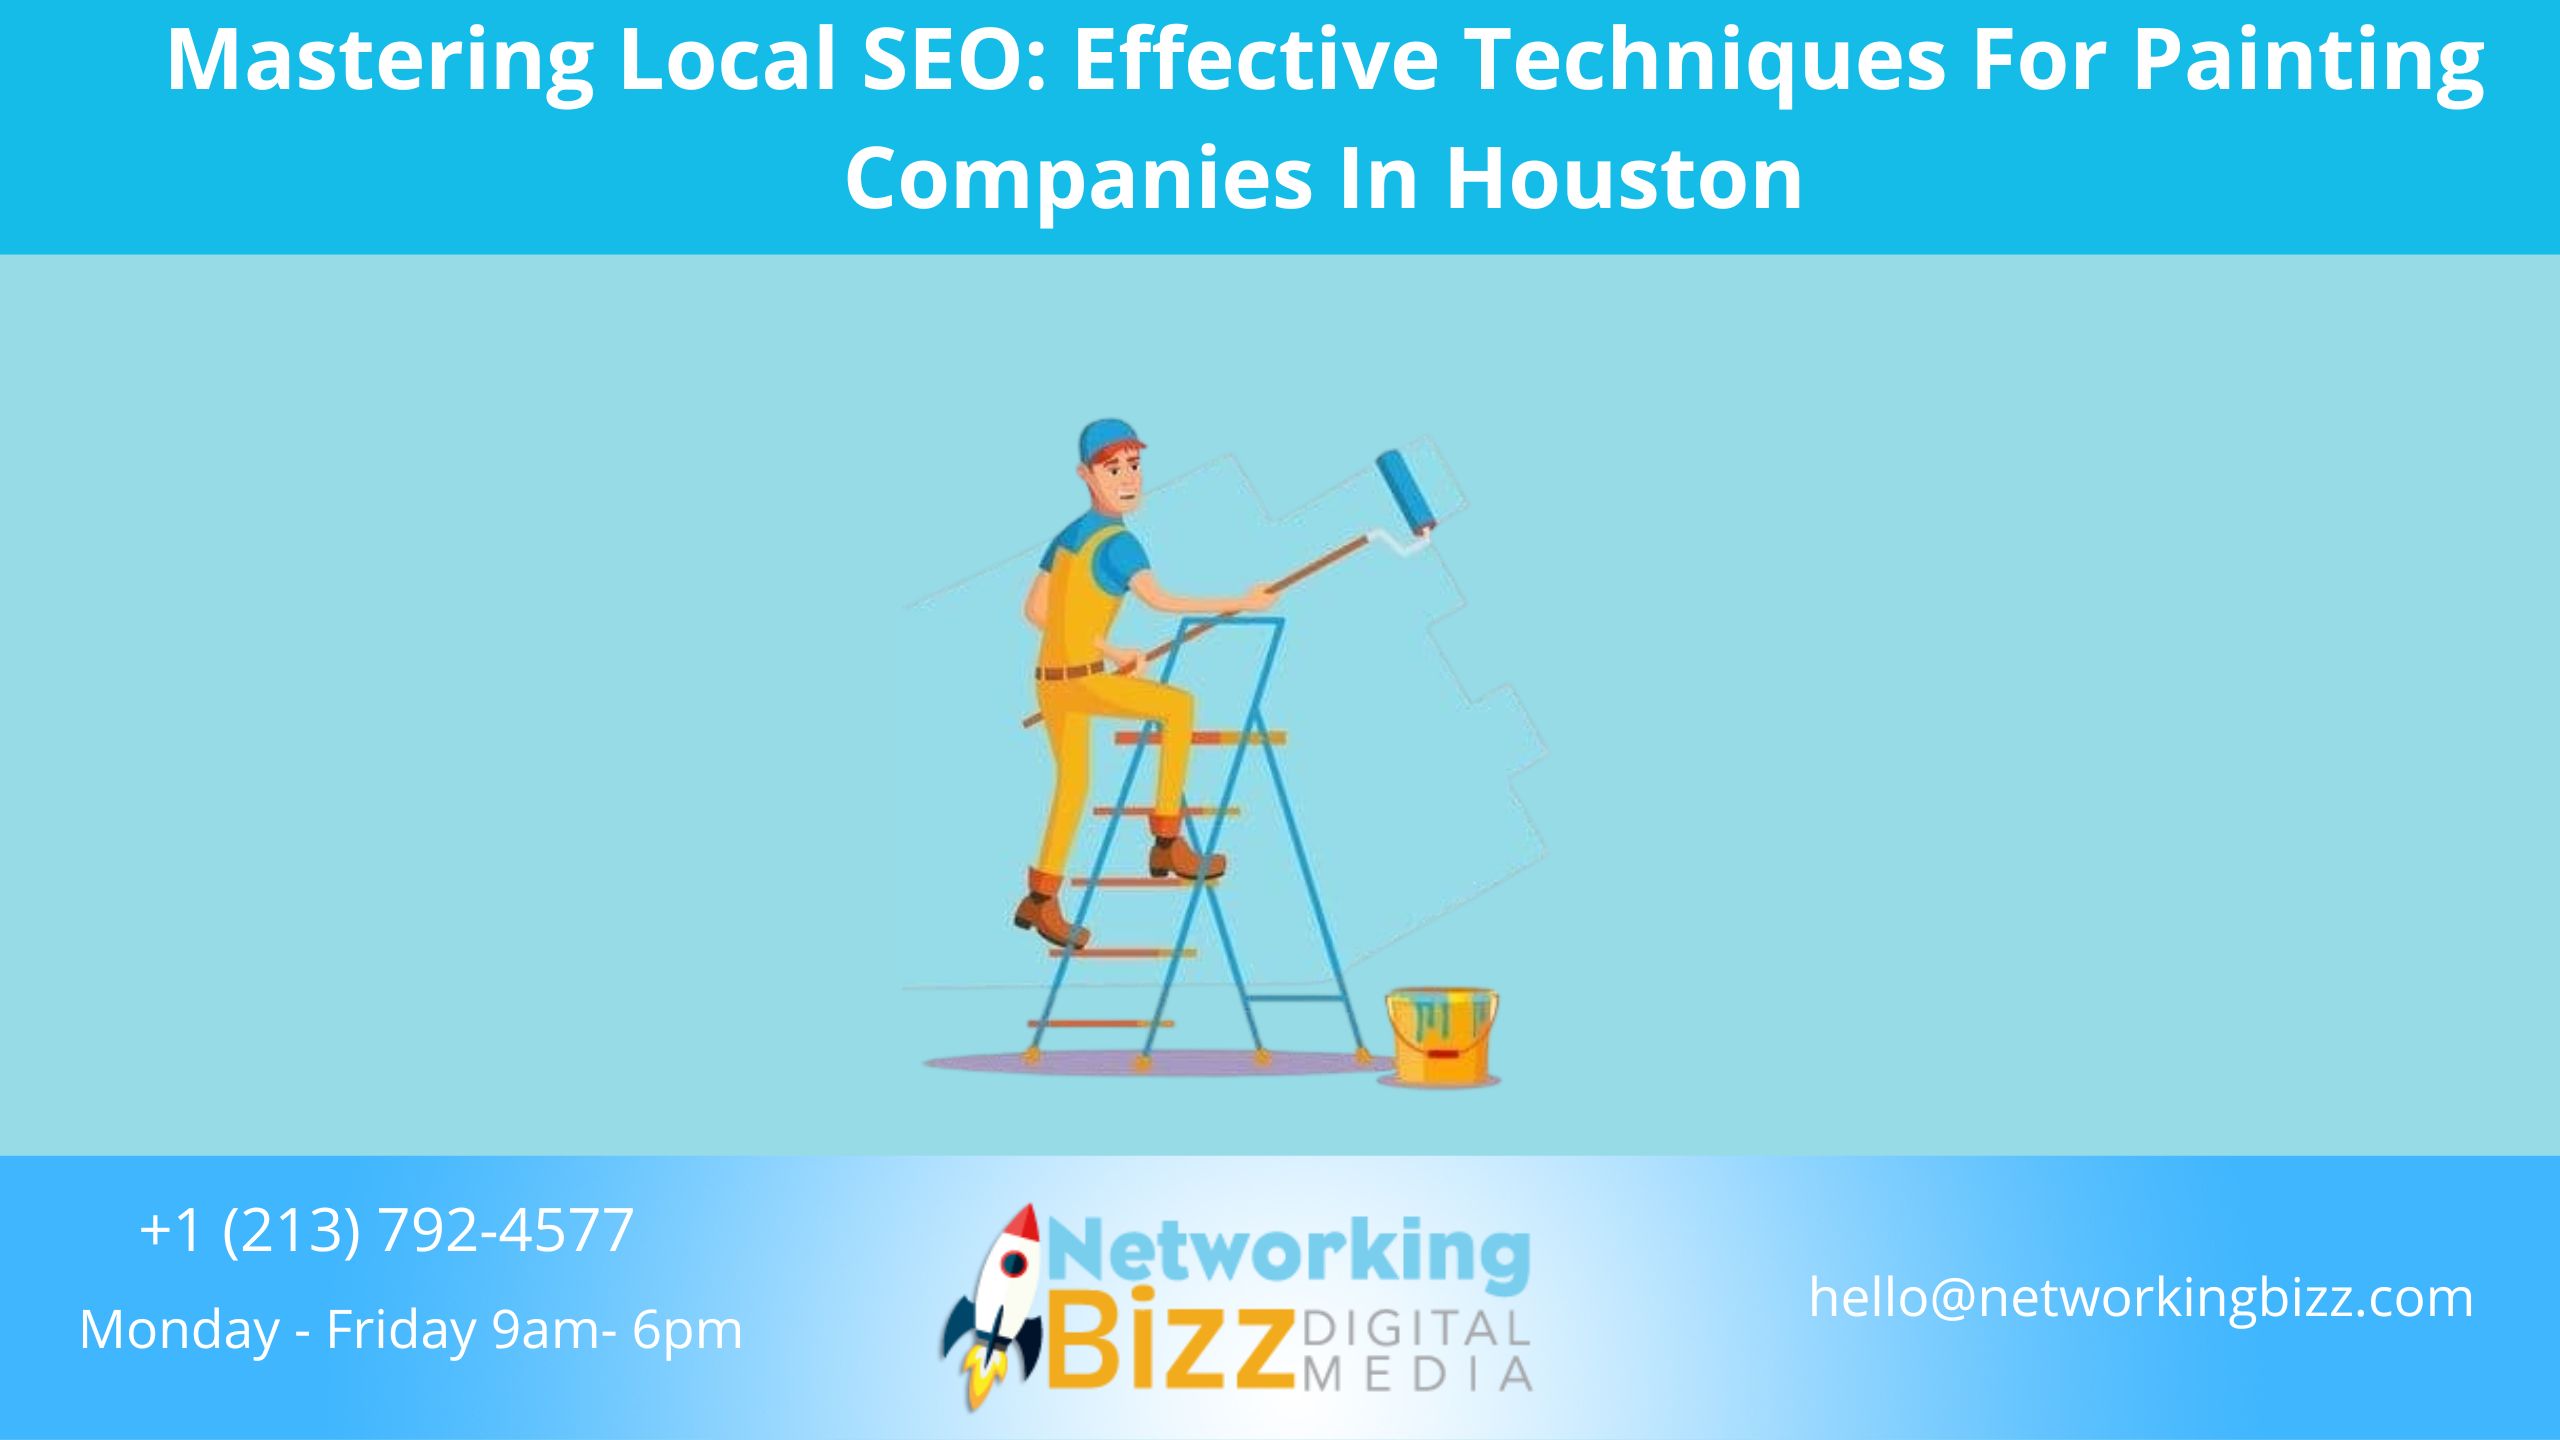 Mastering Local SEO: Effective Techniques For Painting Companies In Houston